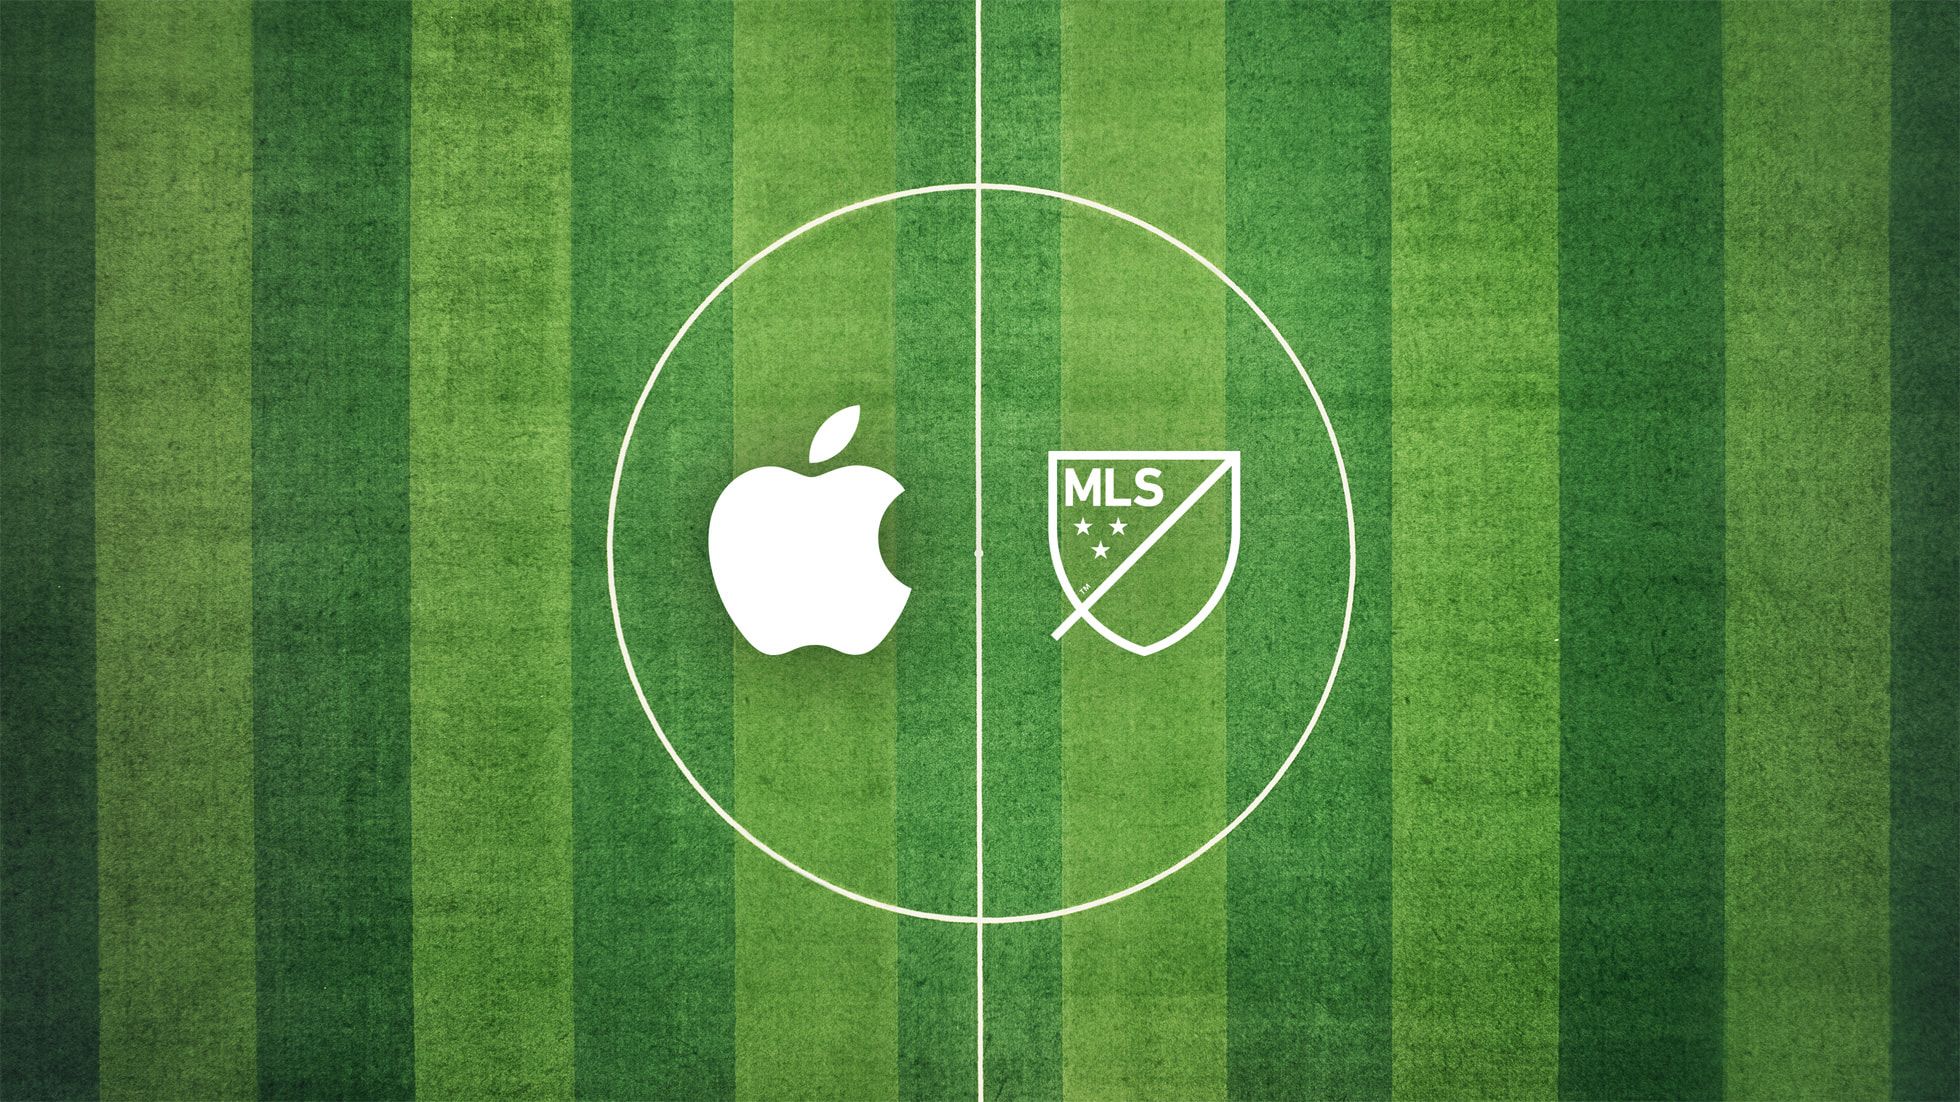 Apple and MLS logo on a soccer field